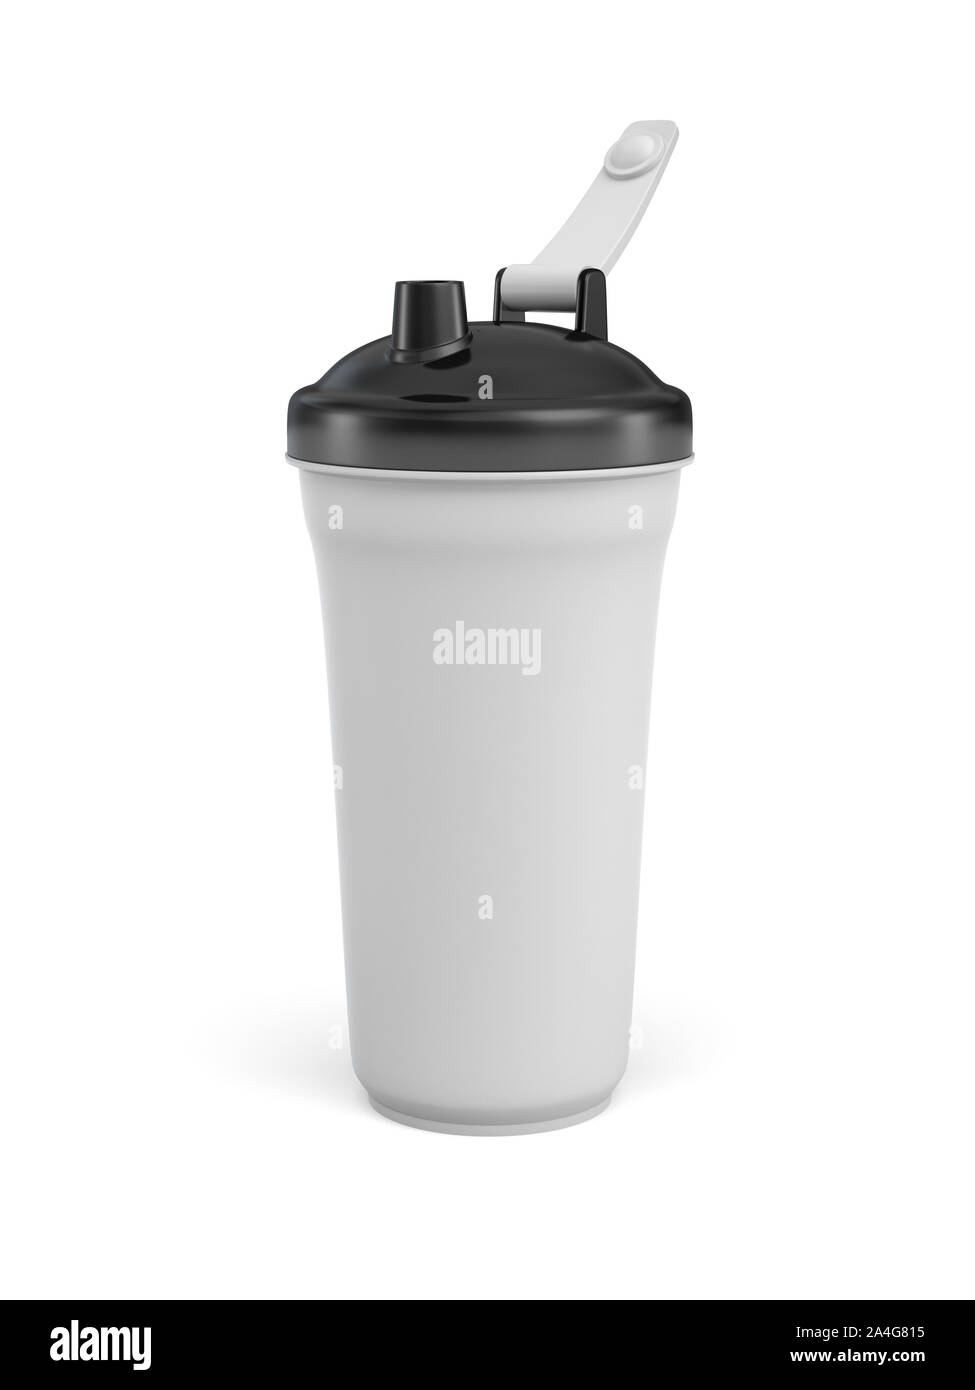 https://c8.alamy.com/comp/2A4G815/3d-rendering-of-white-shaker-with-black-covers-on-white-background-fitness-accessories-kitchenware-healthy-eating-2A4G815.jpg